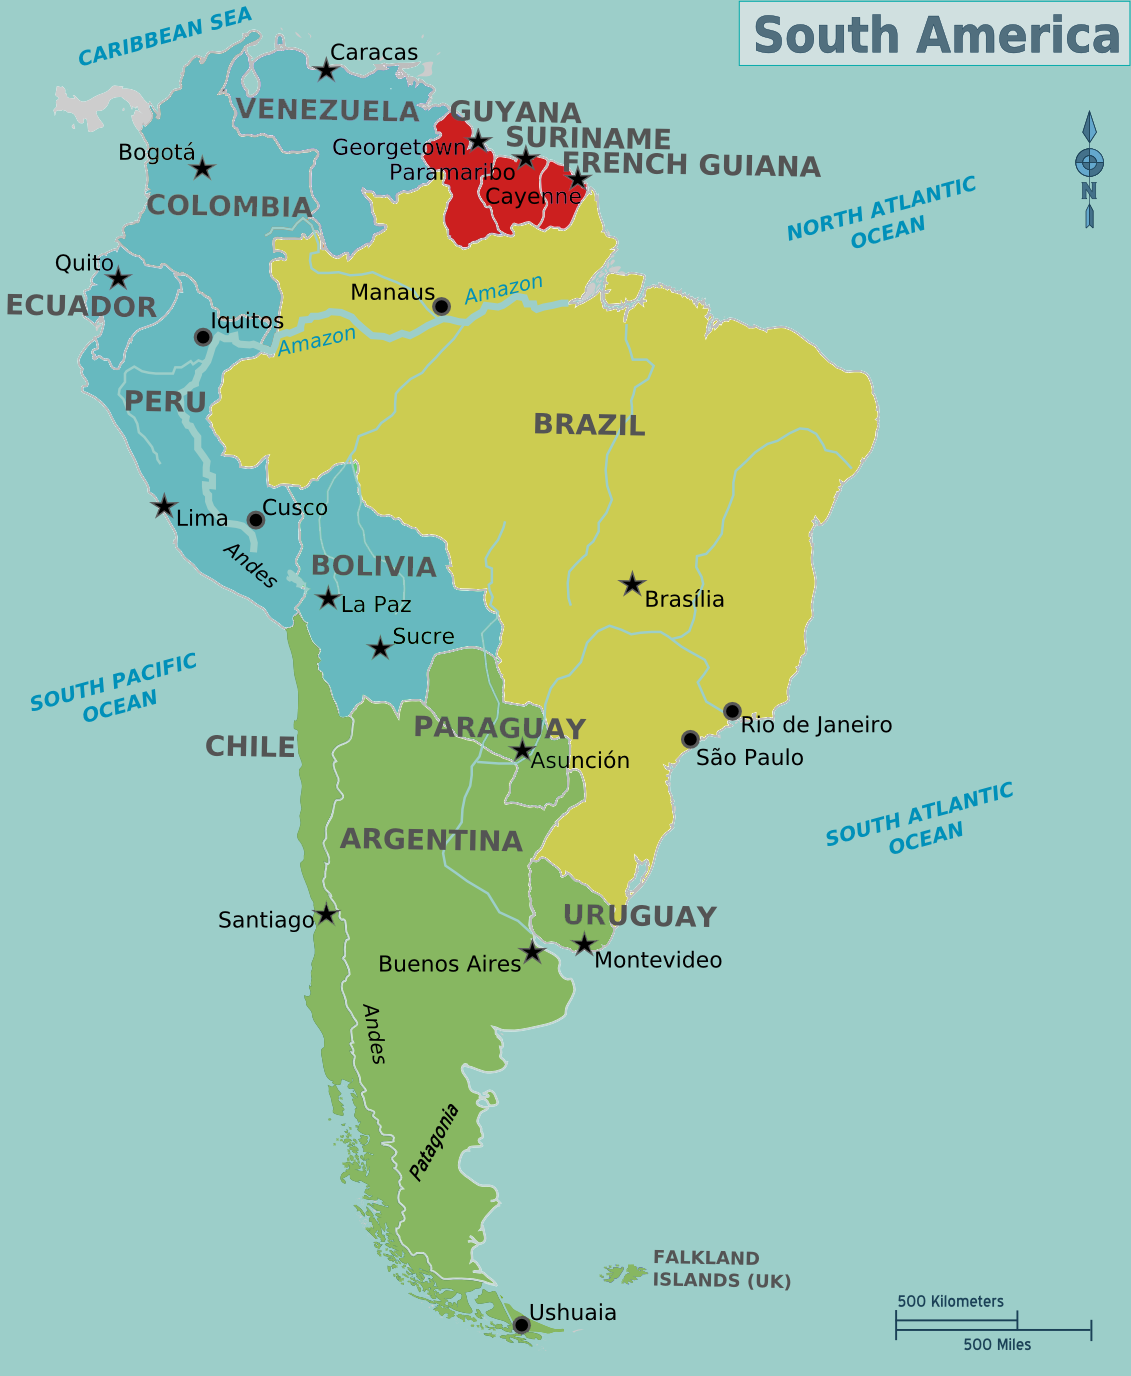 File:South America Color-coded Regions.png - Wikimedia Commons